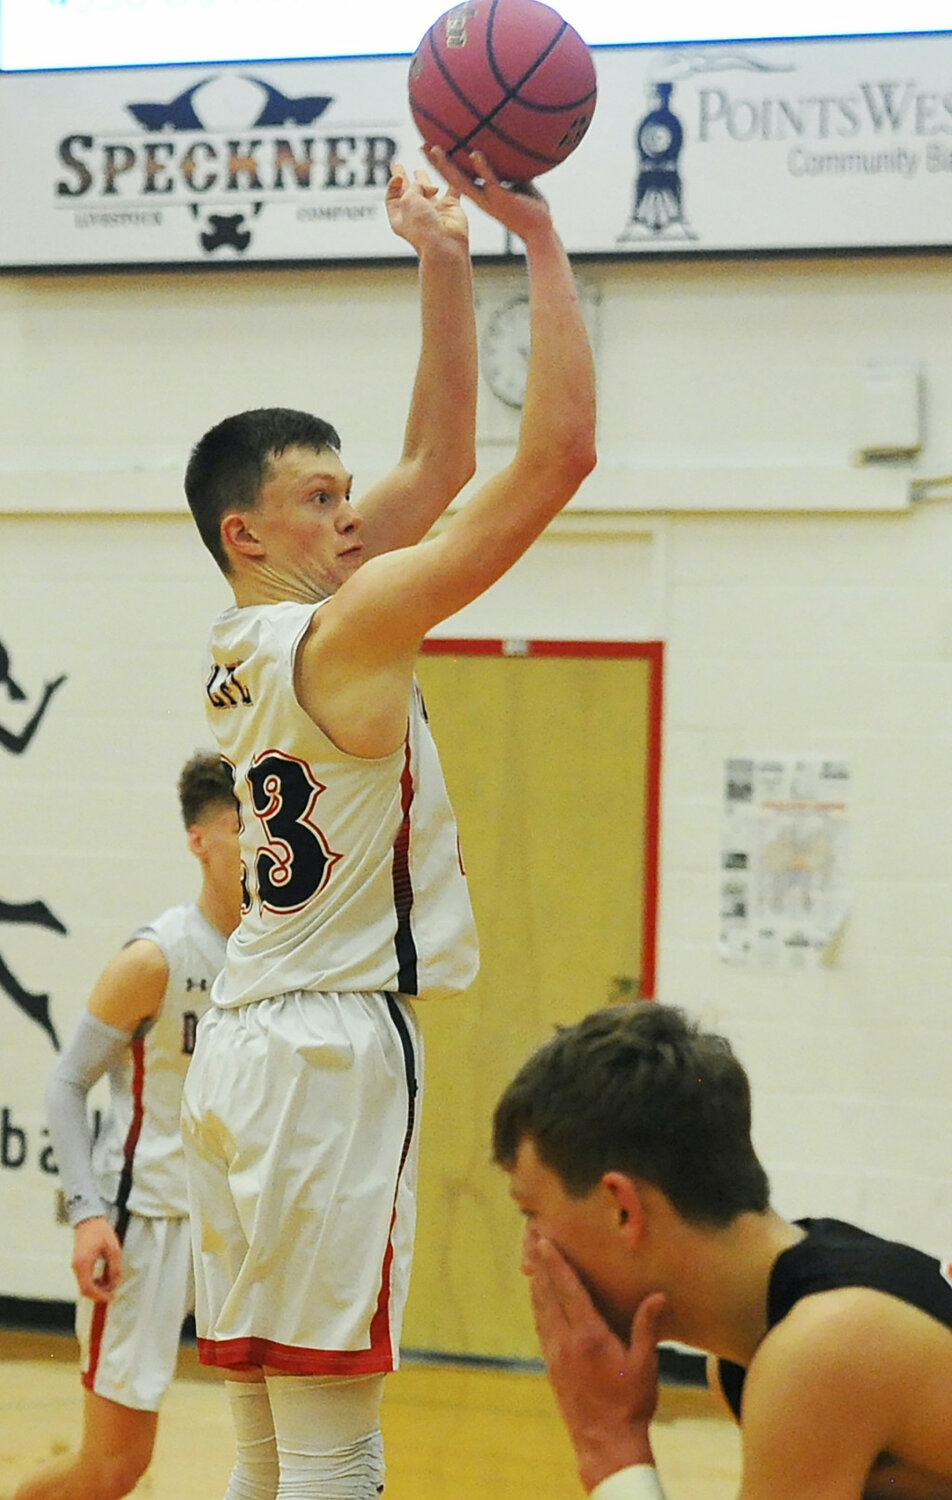 Sophomore Brady Cook, pictured on February 3, broke a 41-year-old high school record for season blocks during the game against Crawford. Cook’s season total for blocks is currently 61.